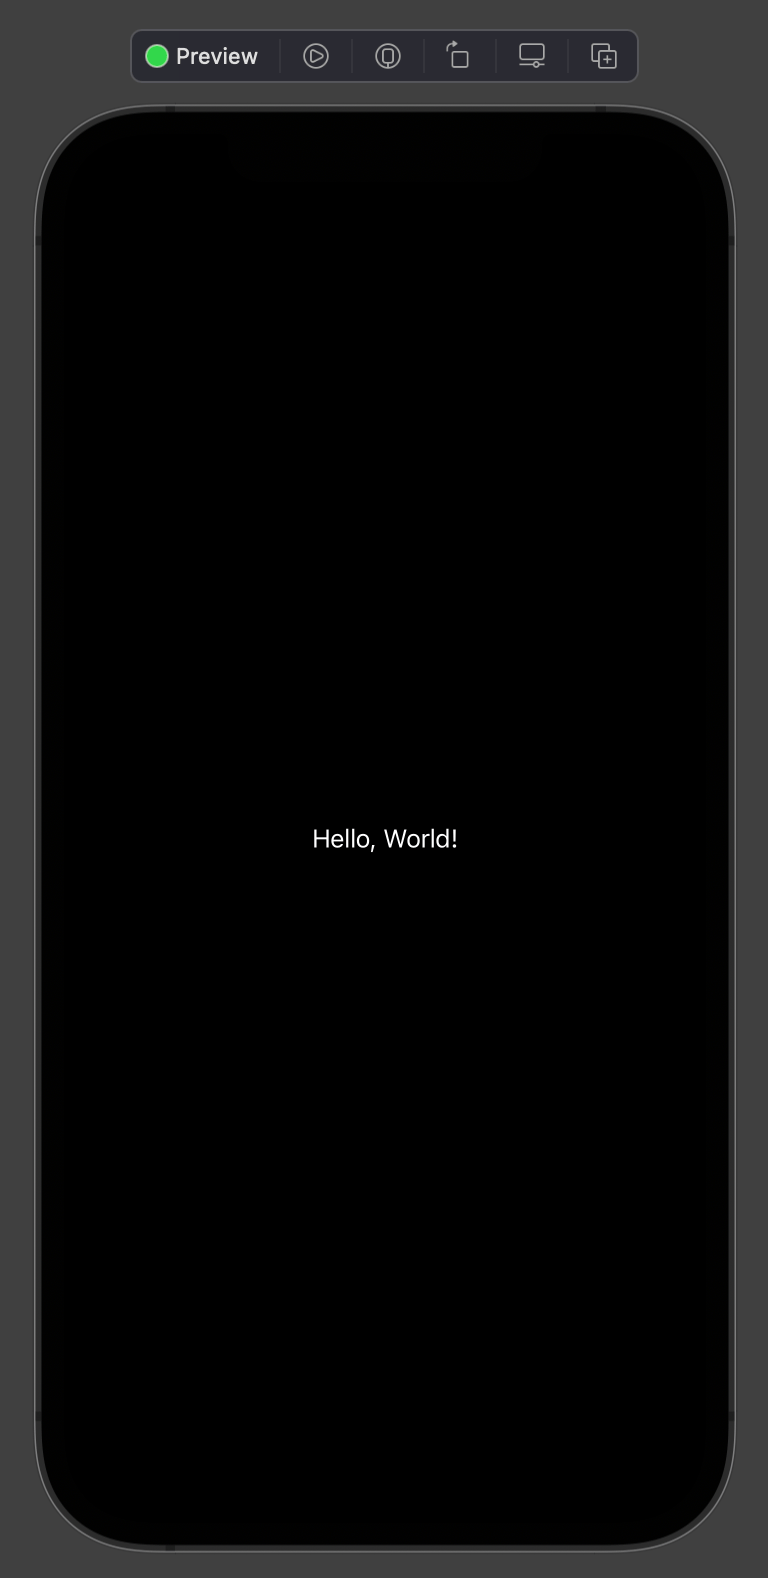 An Xcode Preview in Dark Mode.